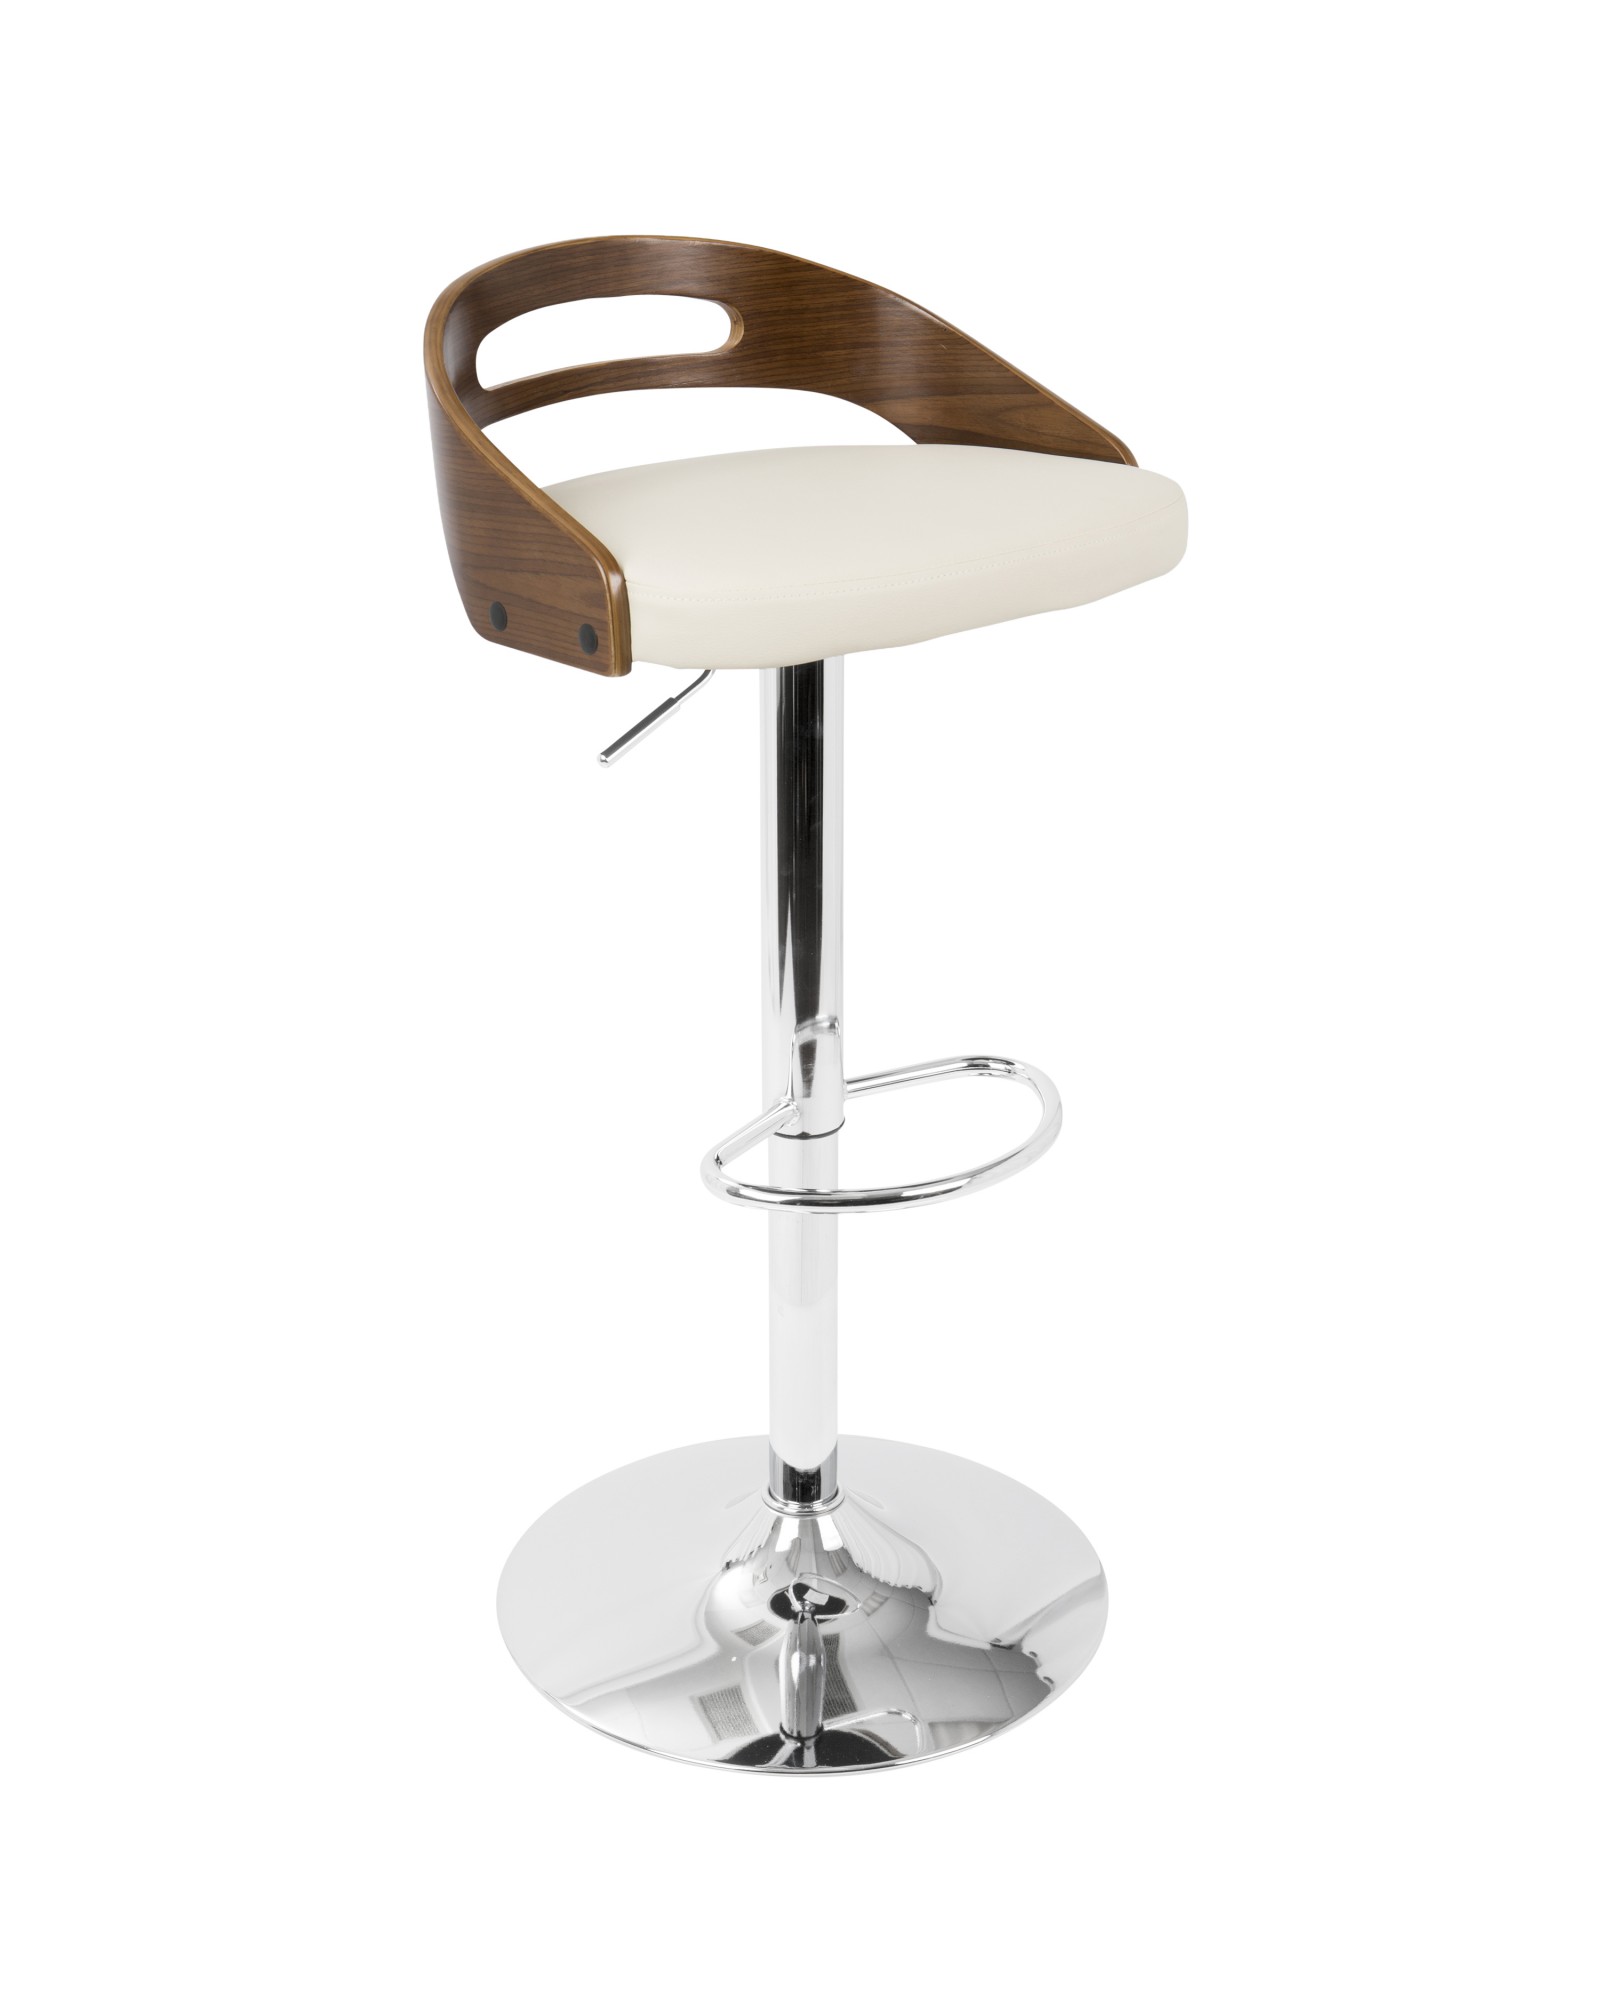 Cassis Mid-Century Modern Adjustable Barstool with Swivel in Walnut And Cream Faux Leather